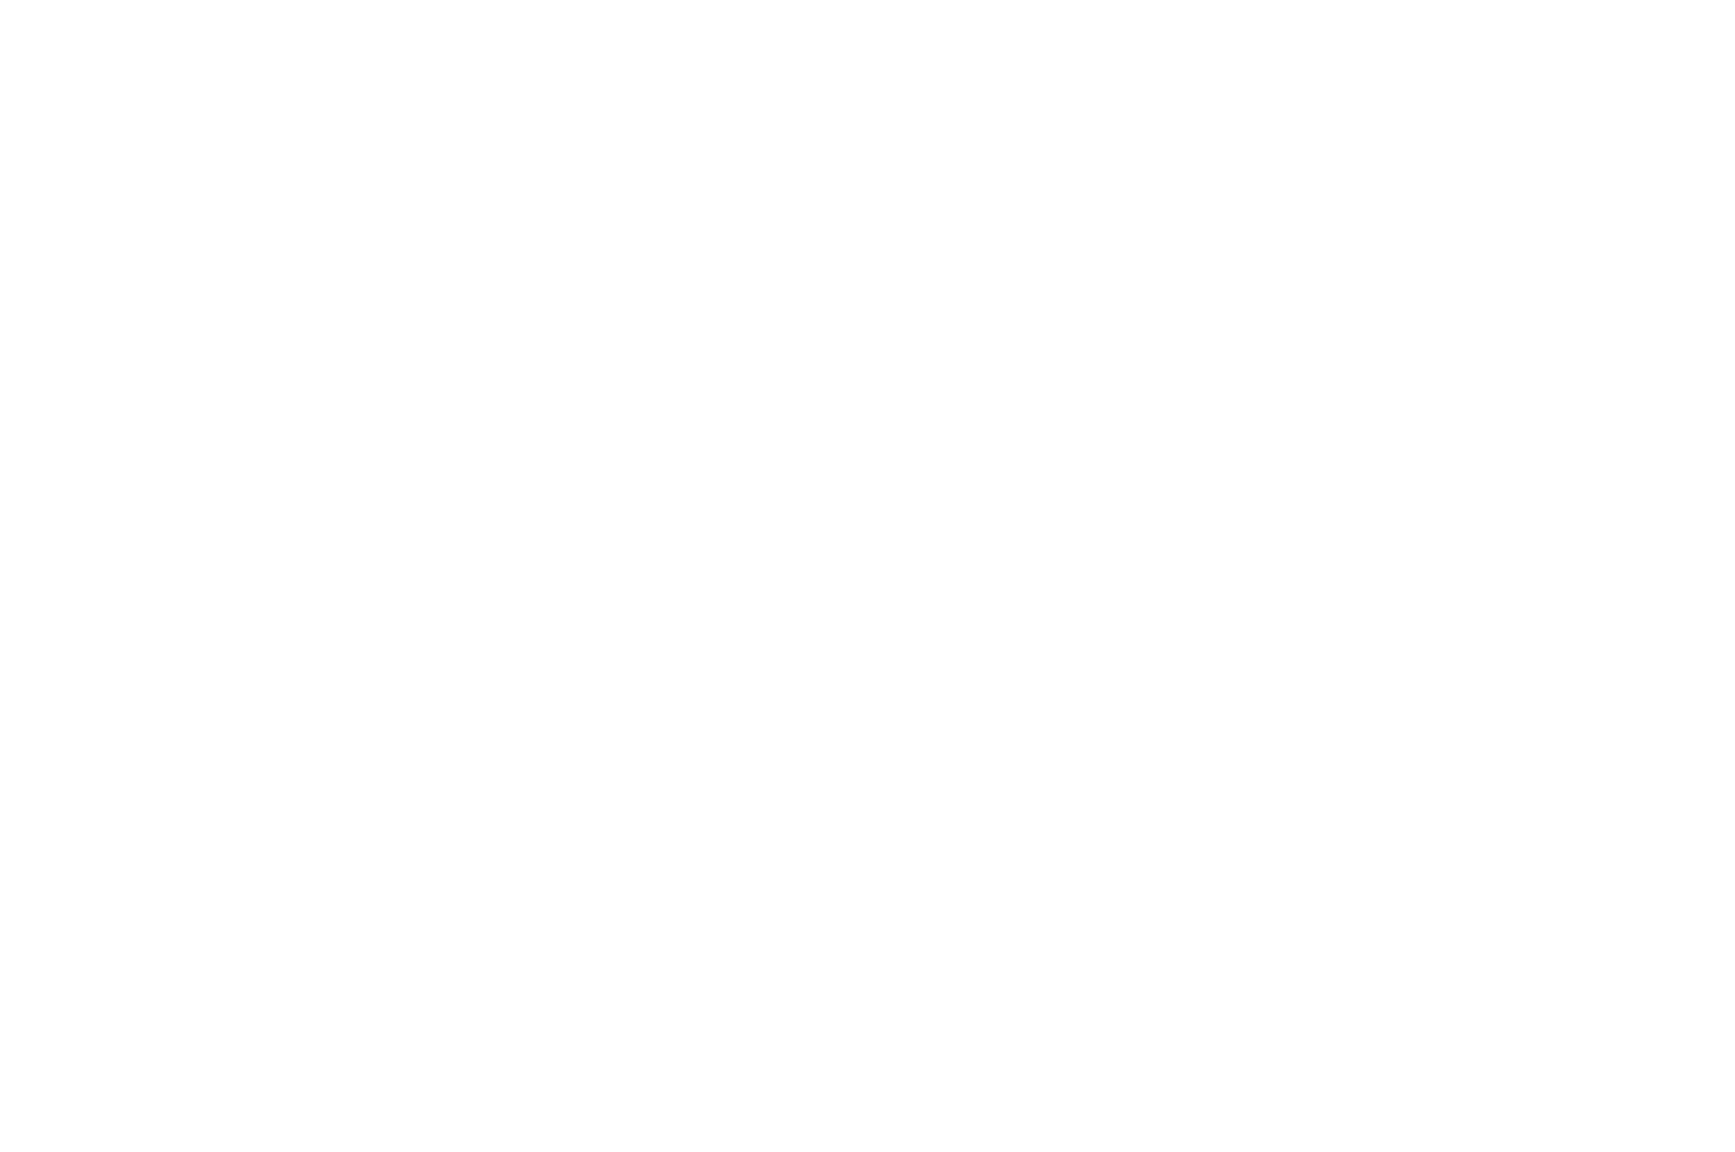 OFFICIAL SELECTION - Flickers Rhode Island International Film Festival - 2020.png